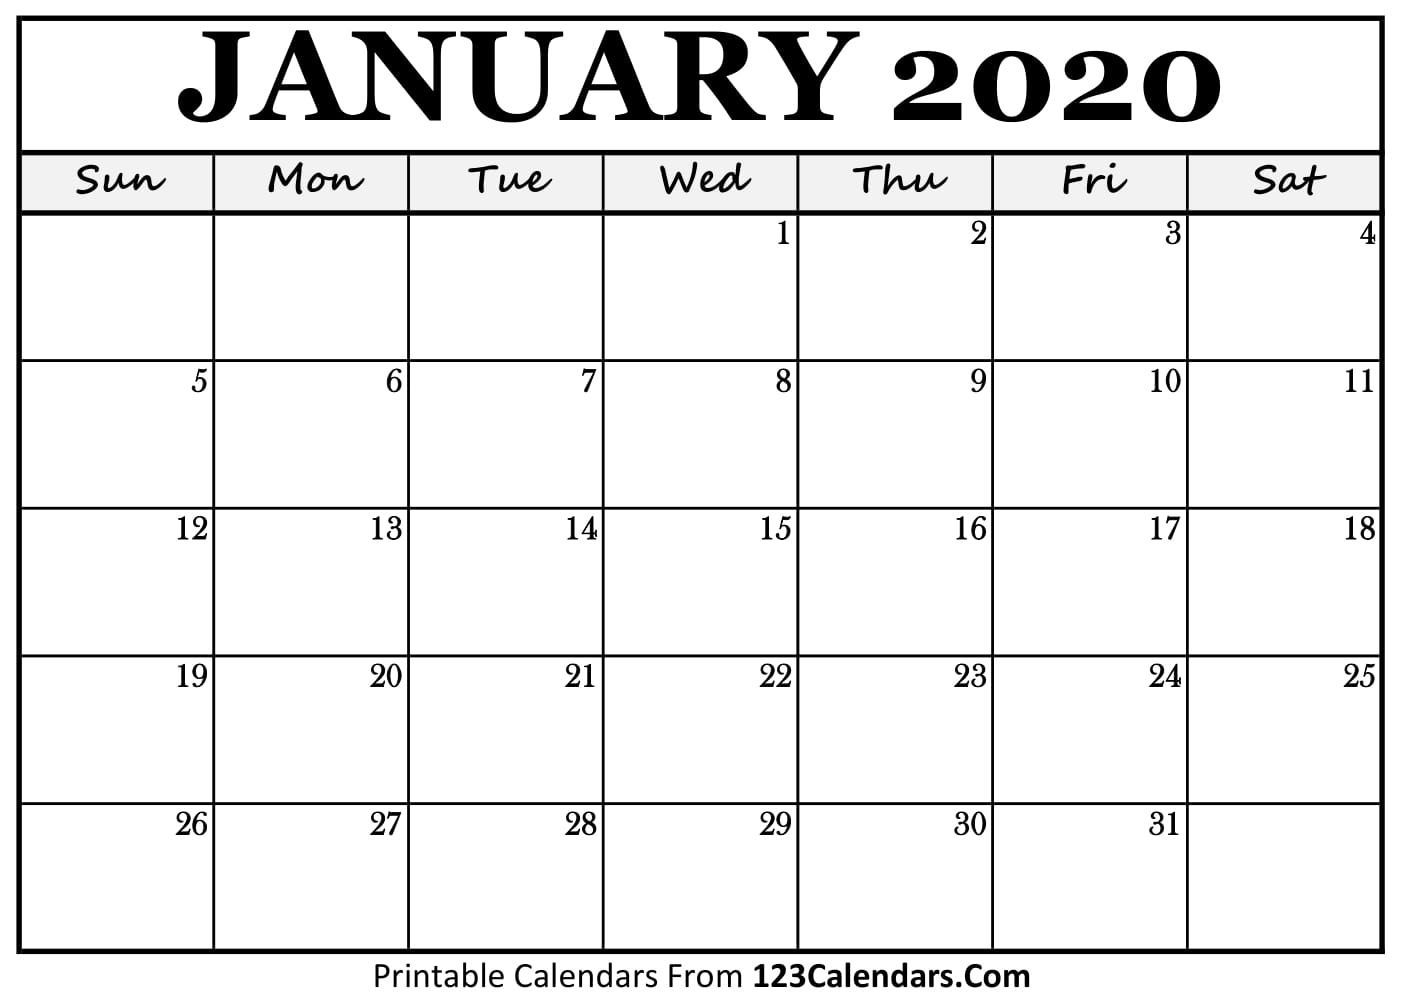 Exceptional Blank Calendar Template 2020 No Weekends In 2020